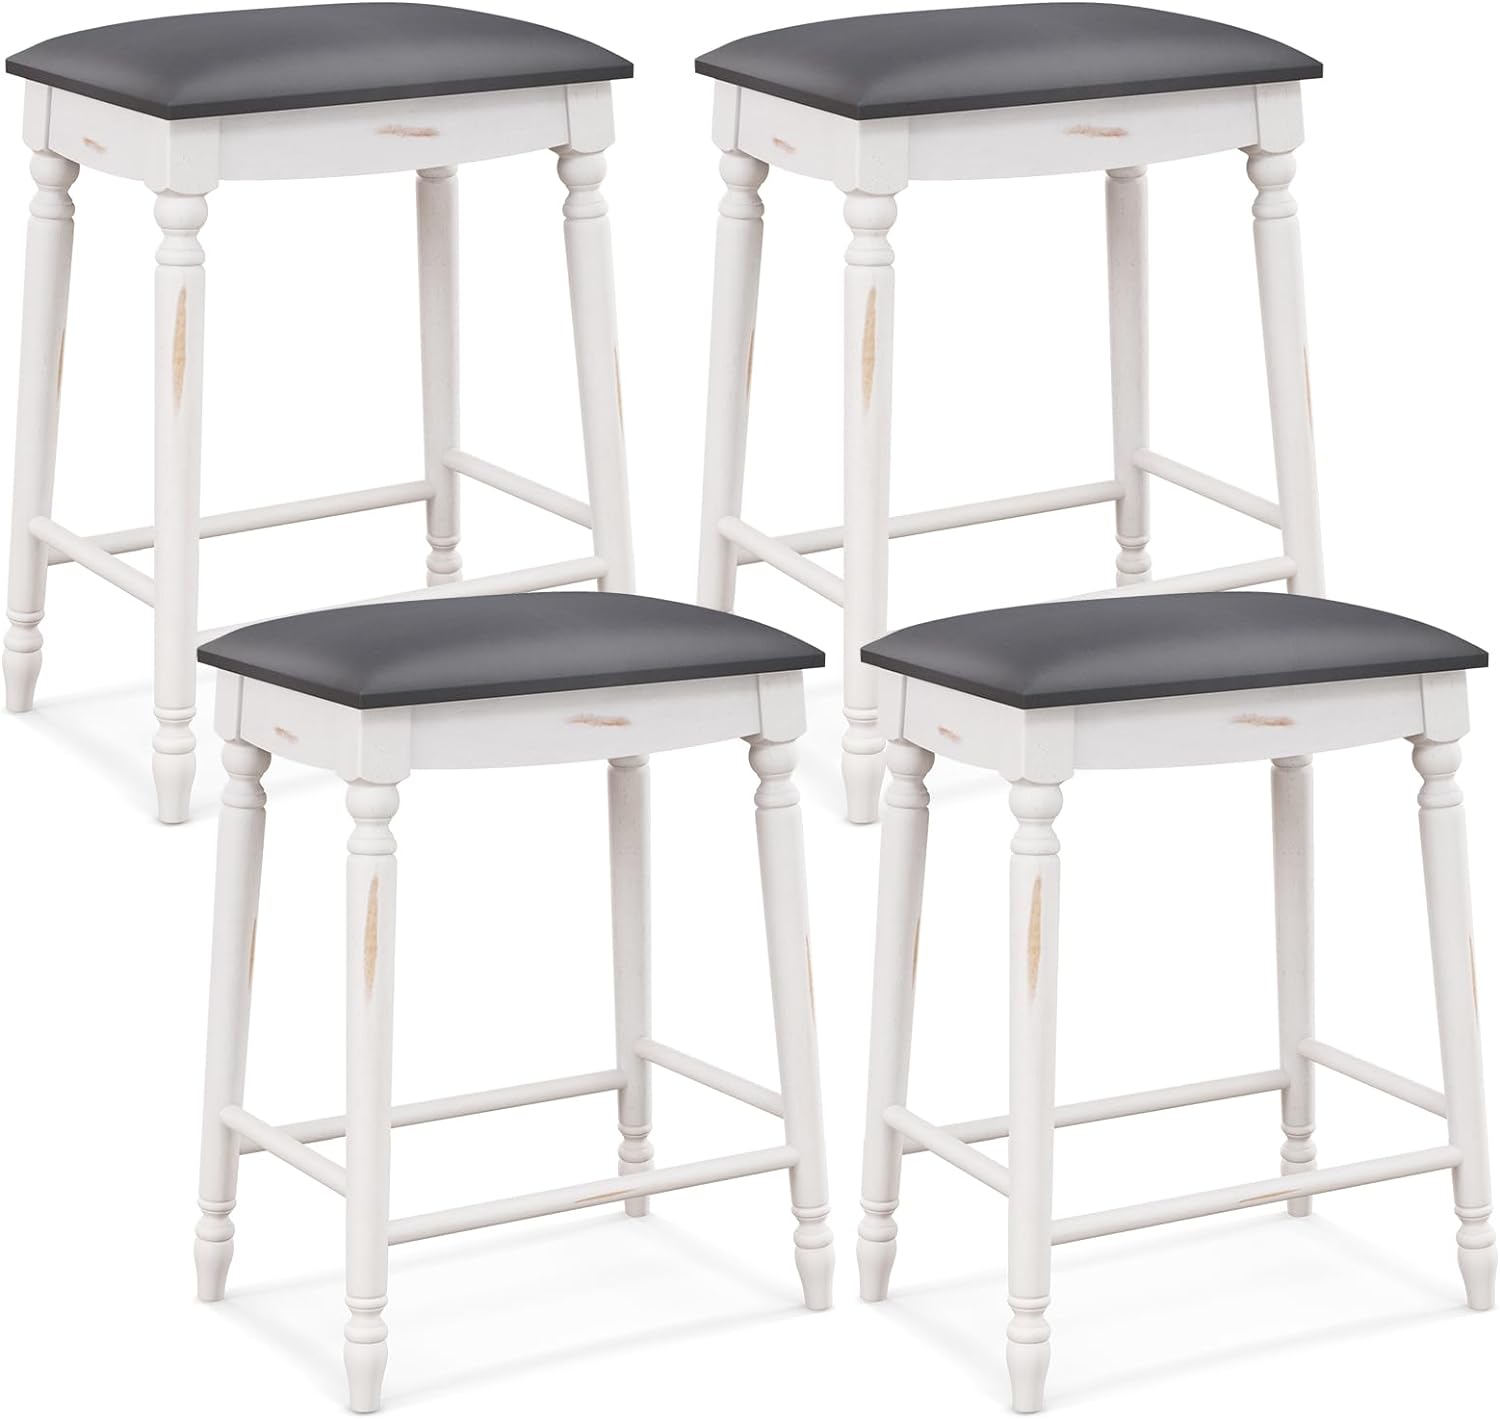 Giantex Bar Stools, 29"/24" Bar Height Saddle Stools w/Padded Seat, Rubber Wood Legs, Footrests & Antiqued Surface